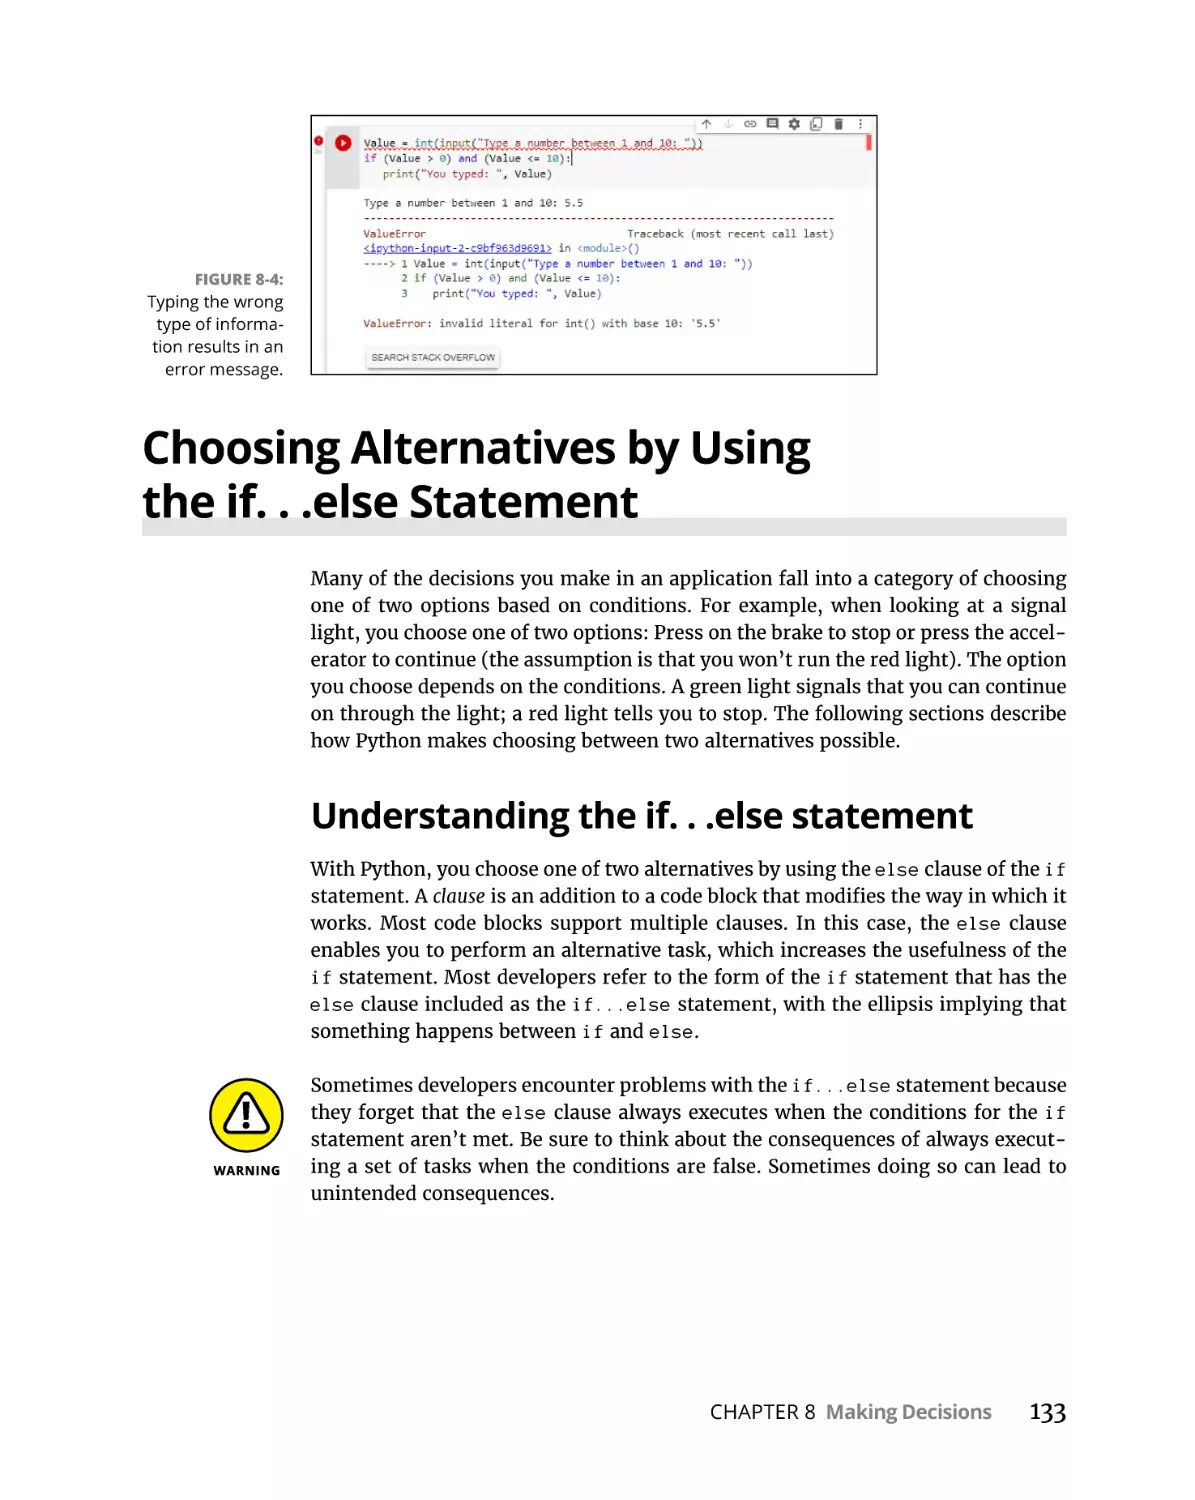 Choosing Alternatives by Using the if. . .else Statement
Understanding the if. . .else statement